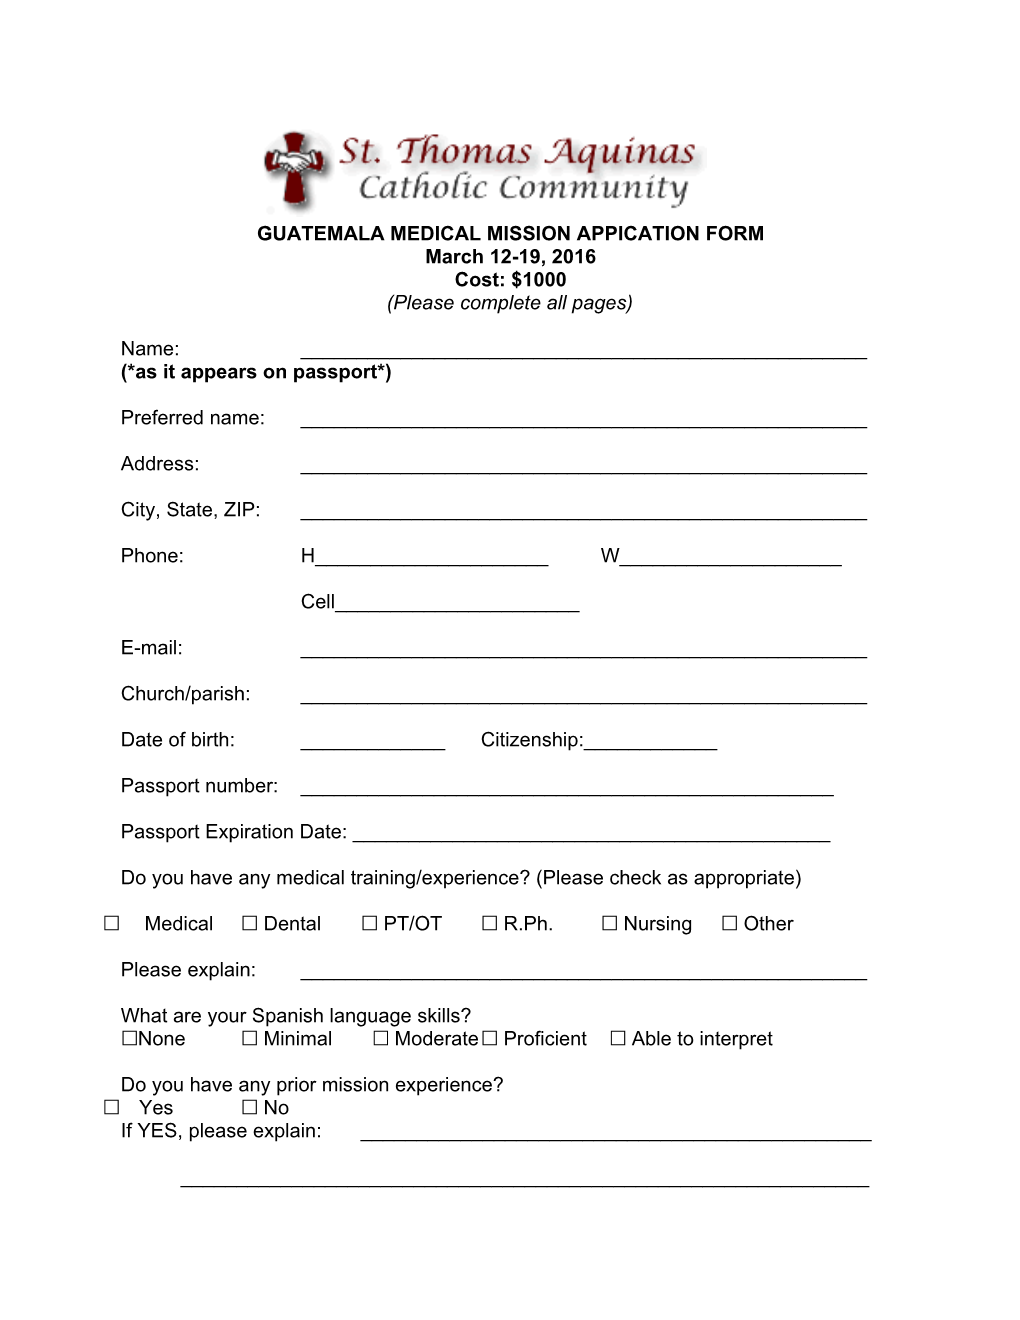 Guatemala Medical Mission Appication Form